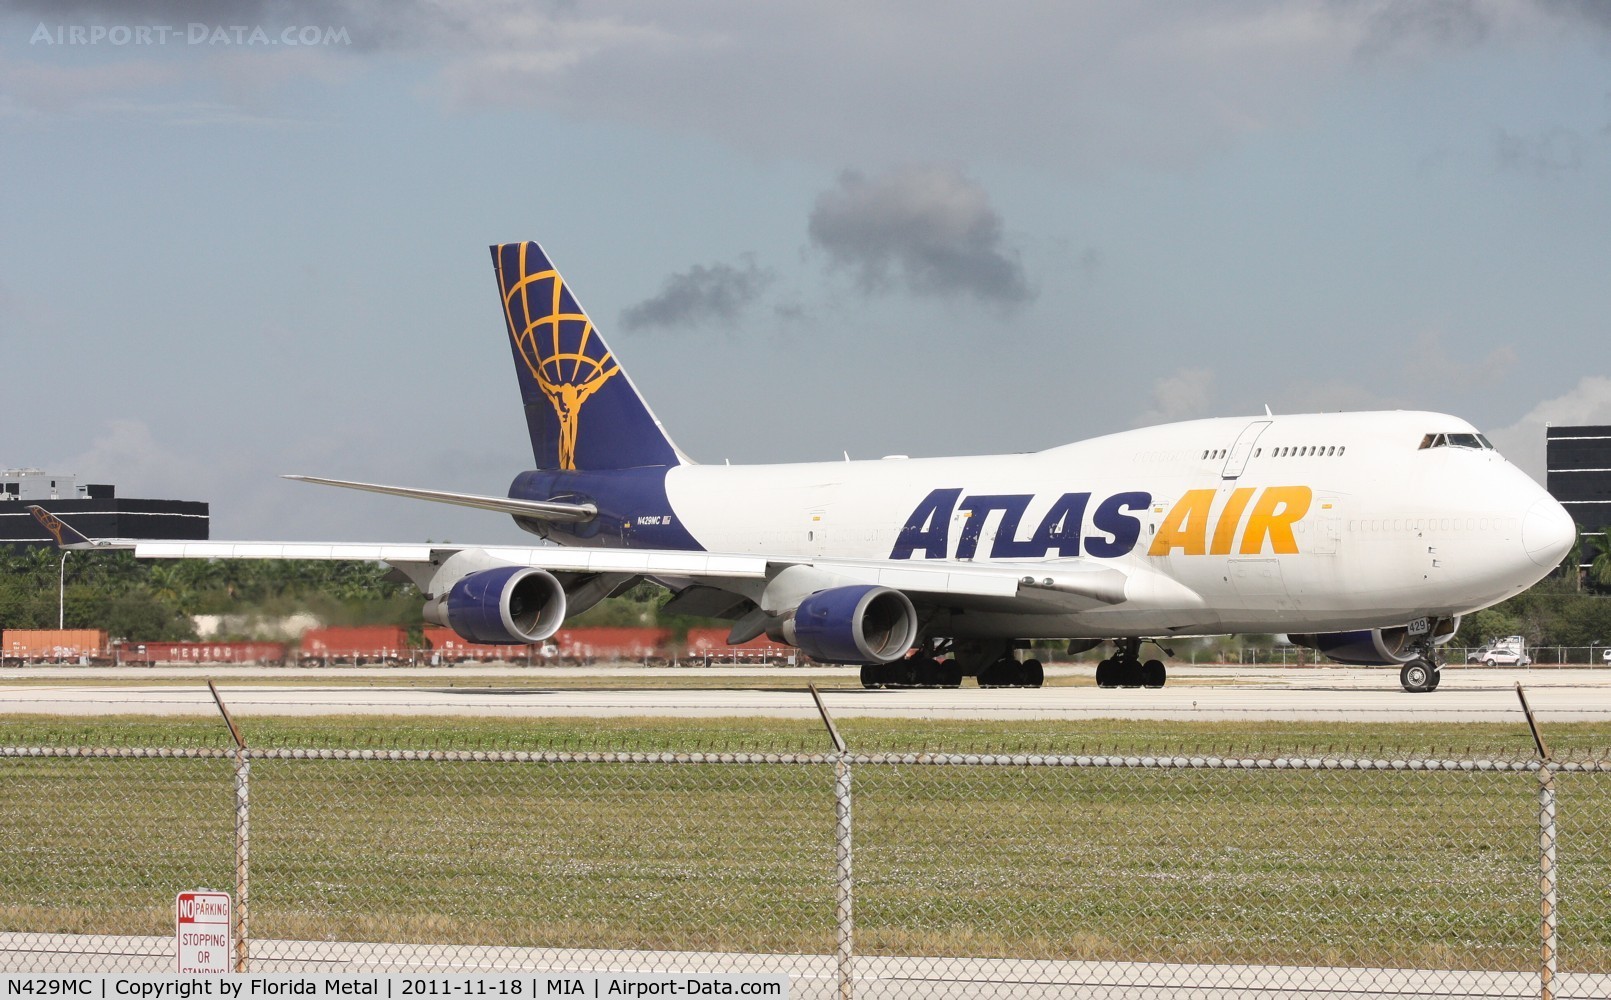 N429MC, 1990 Boeing 747-481 C/N 24833, After waiting for an ATR to land, the Atlas 747 was cleared to depart Runway 9